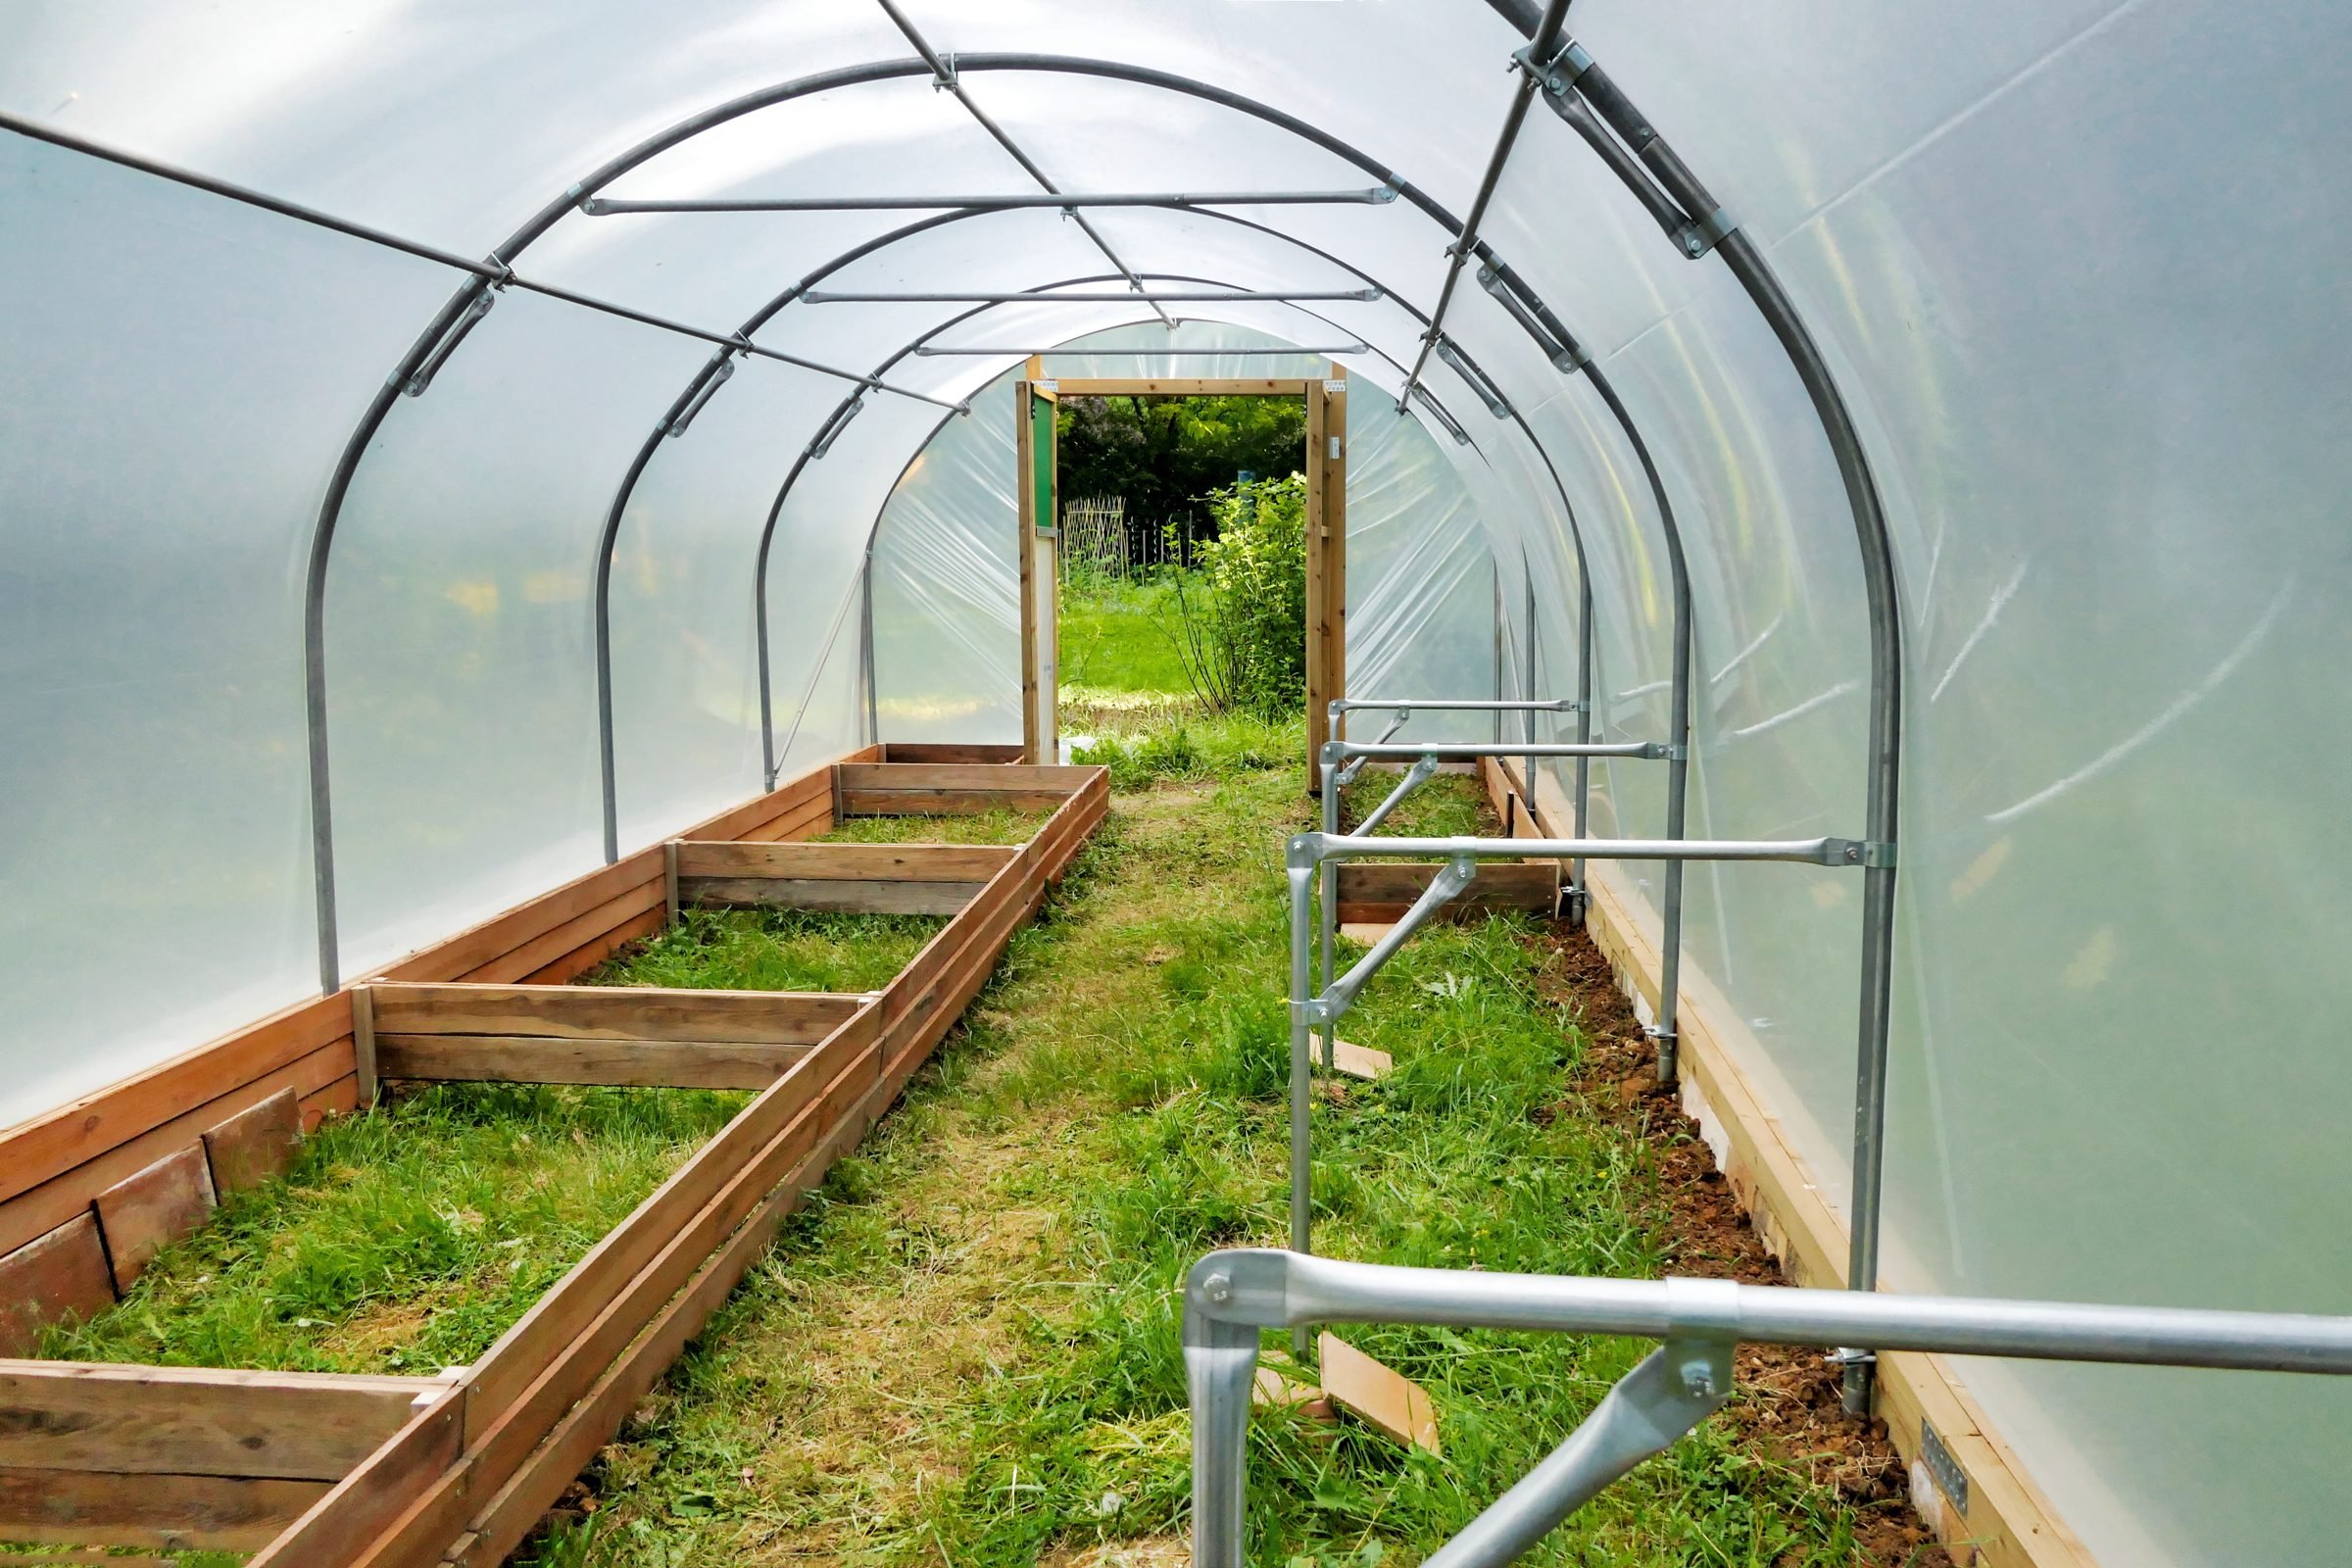 Inexpensive Plastic Greenhouse: The Affordable Solution for Budding Gardeners